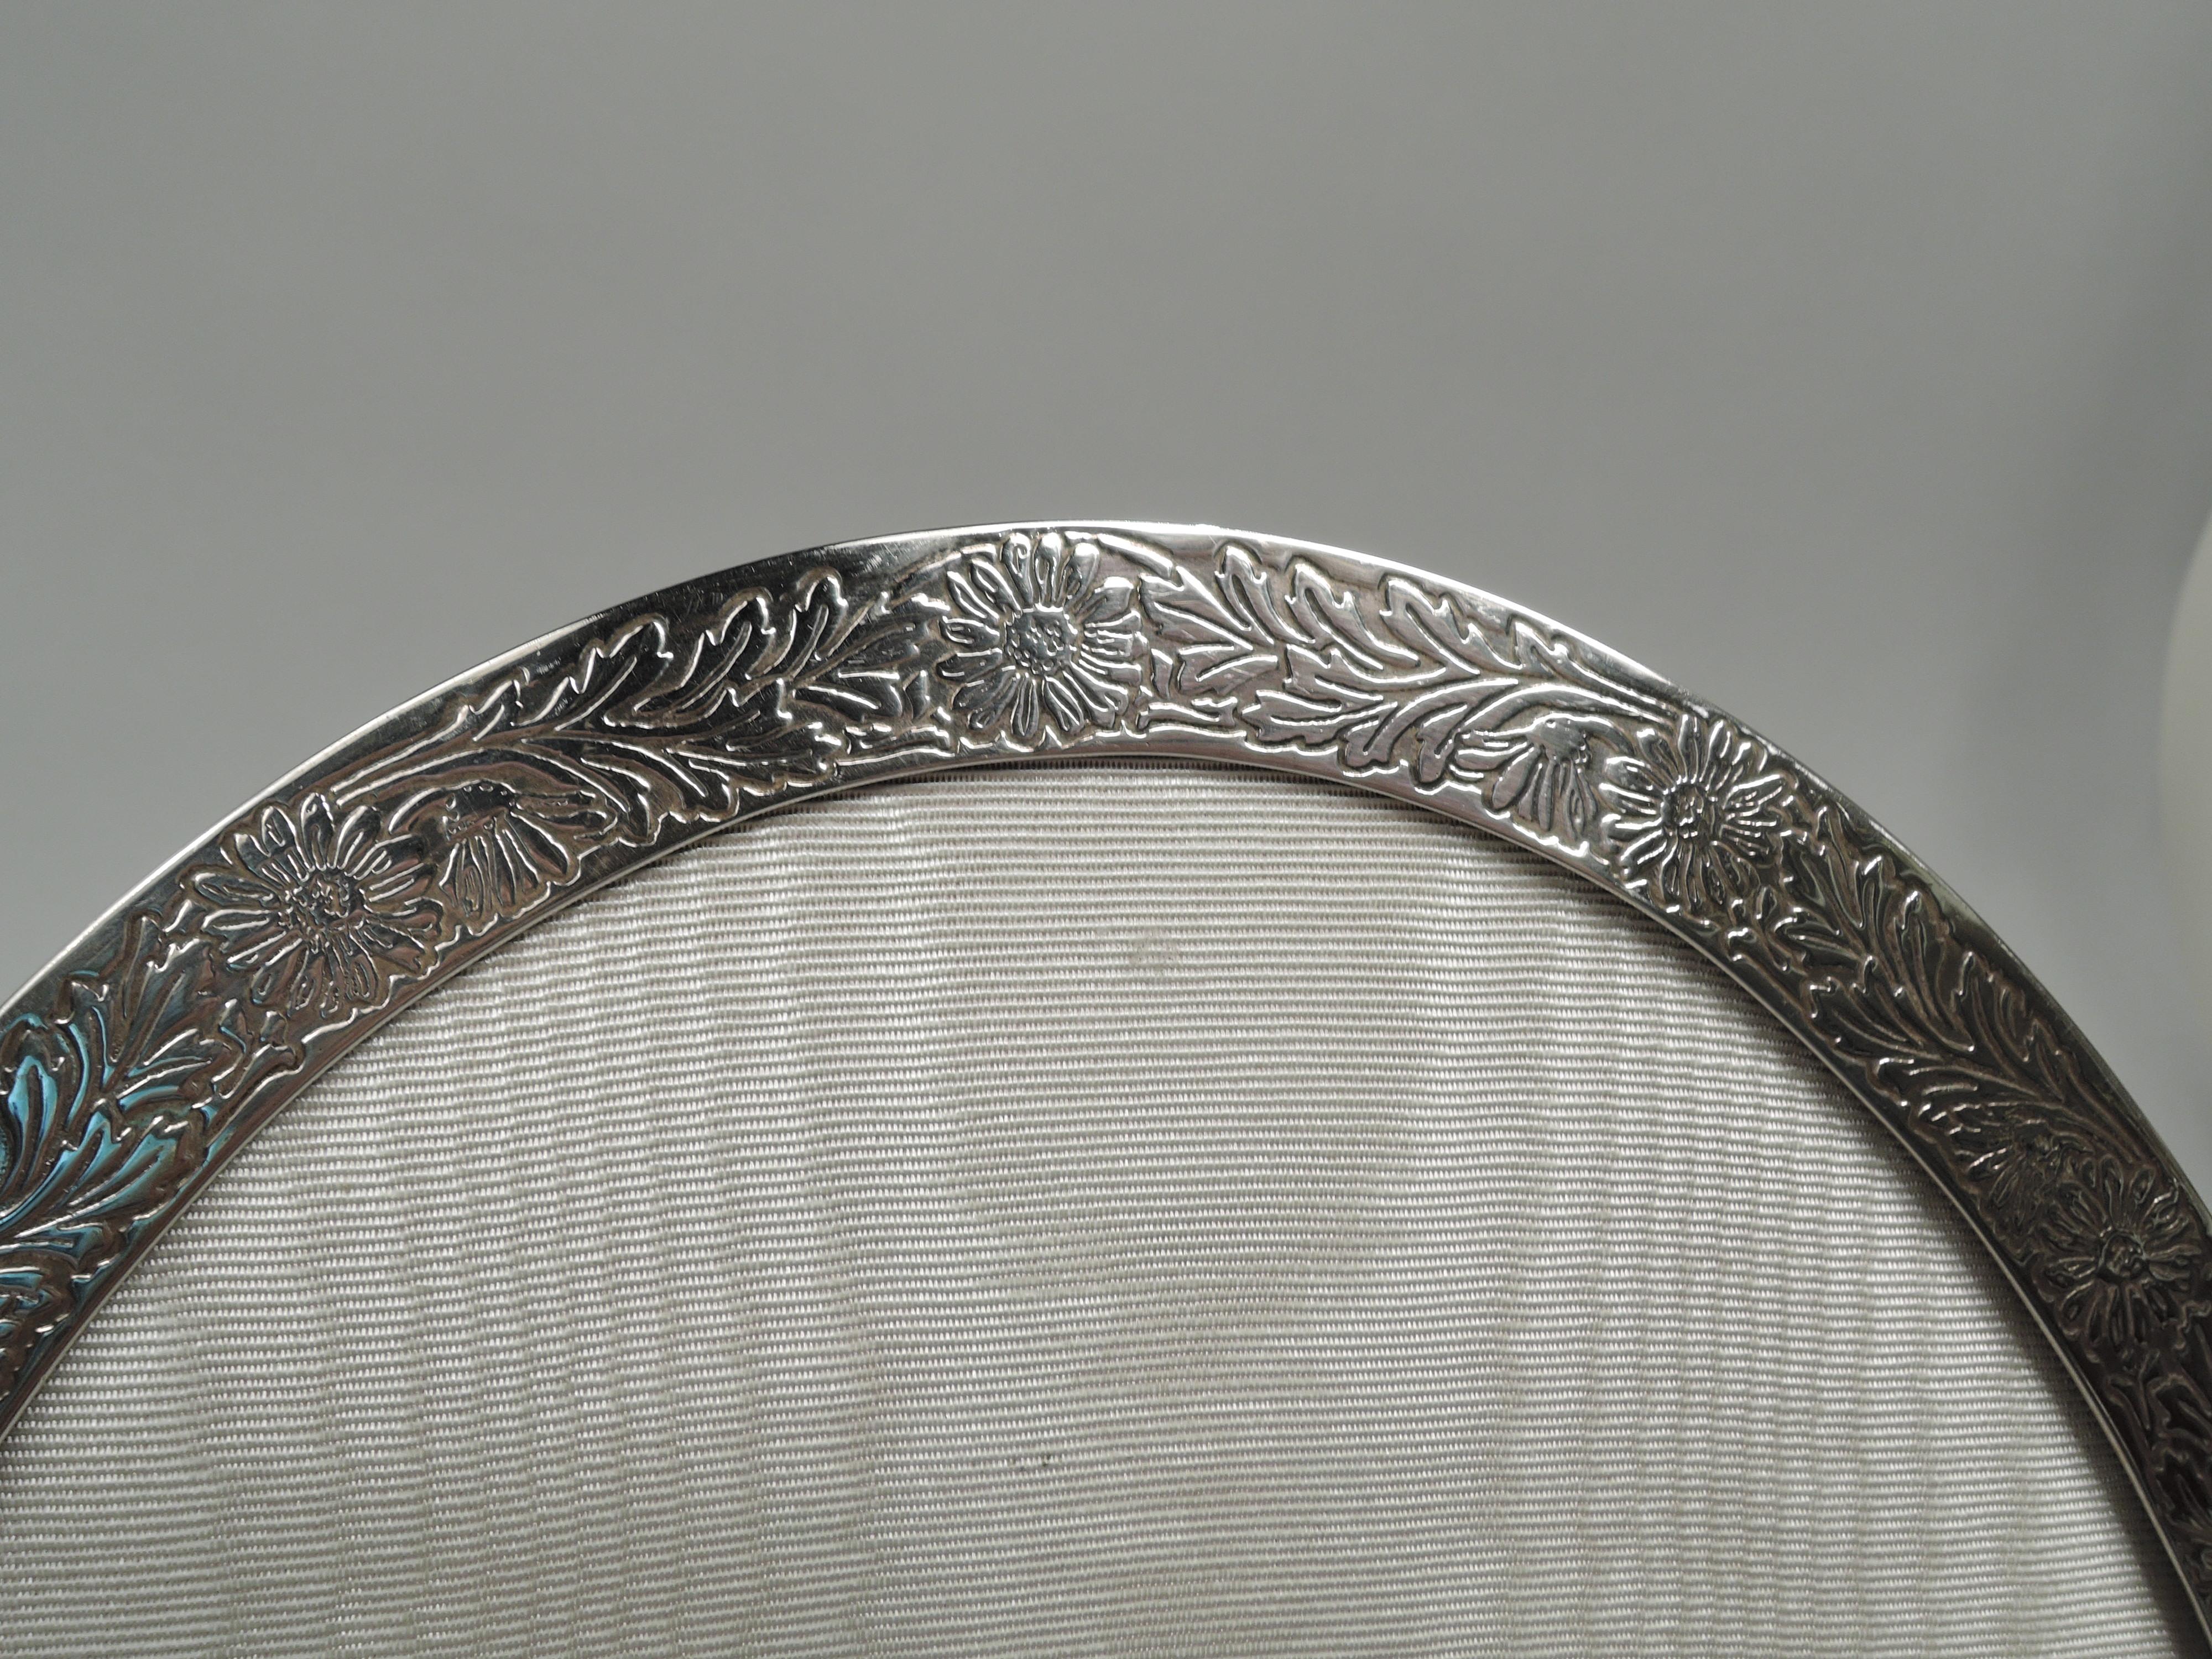 Charming Edwardian sterling silver picture frame. Made by Tiffany & Co. in New York, ca 1910. Oval window in same flat surround. On front acid-etched daisy chain with dense leaf and flower arrangement; tubular cartouche (vacant). Sides plain with